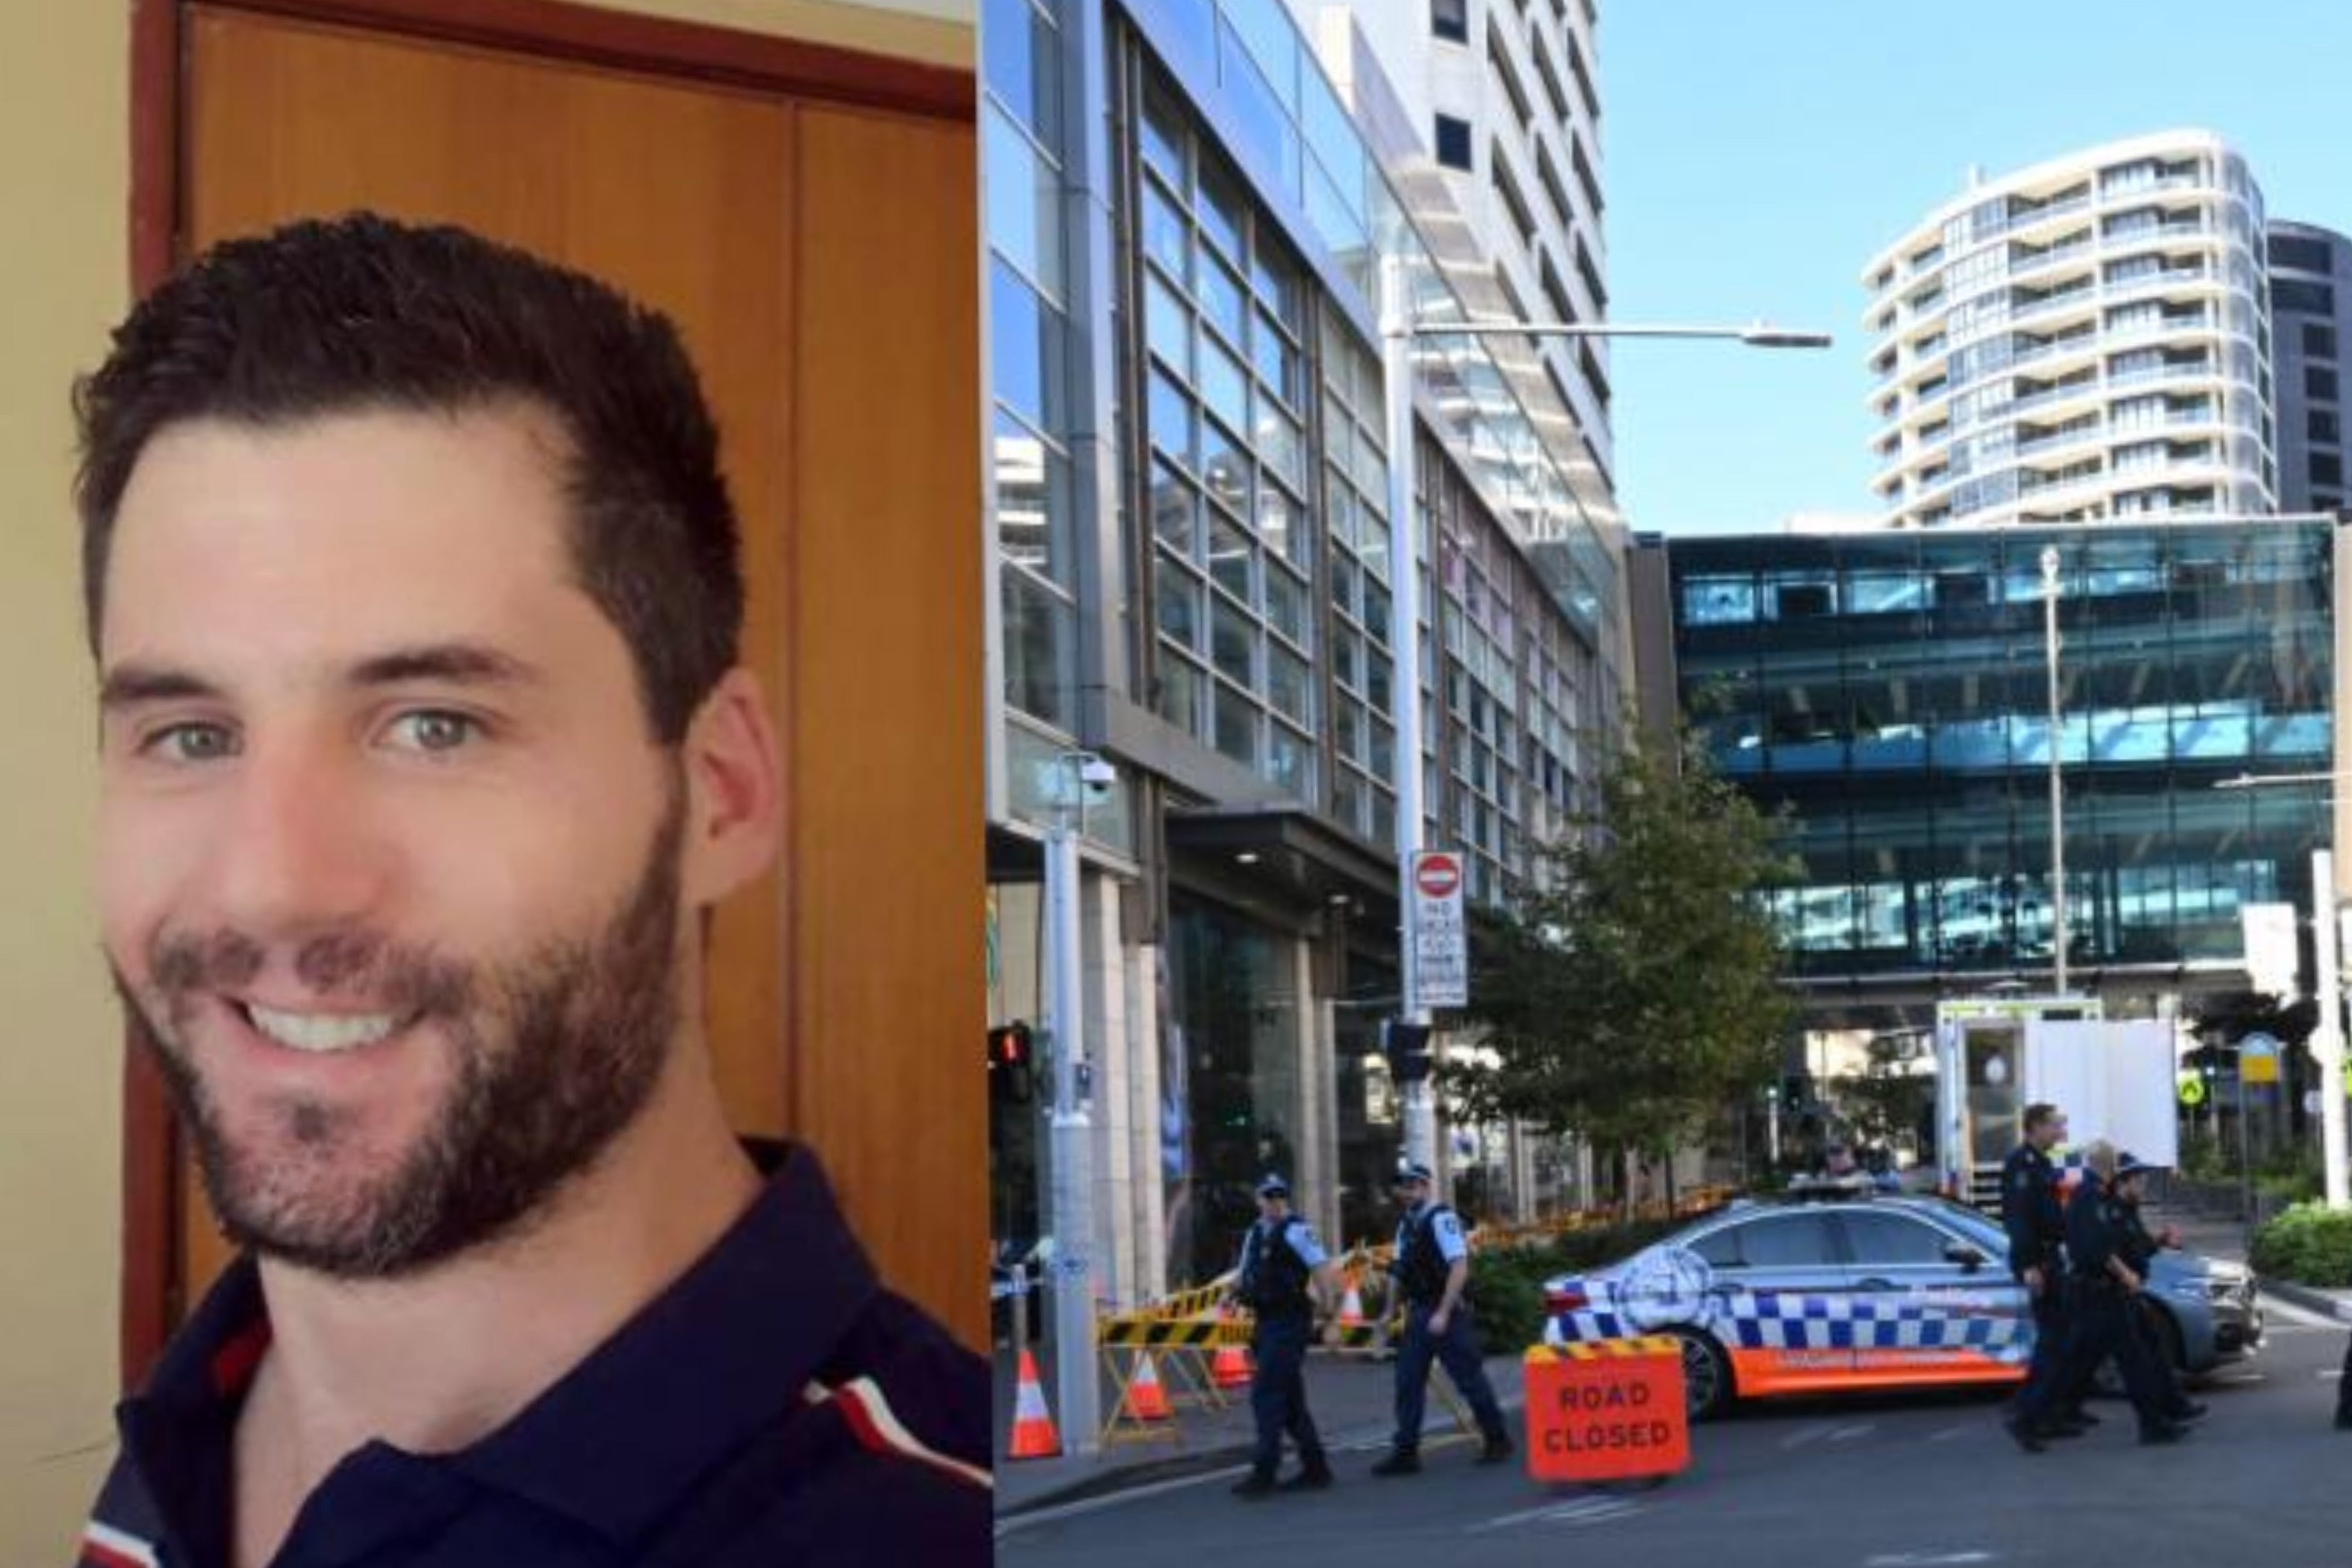 Joel Cauchi, 40, is the perpetrator of the terrible knife attack that killed 6 people in Sydney: 